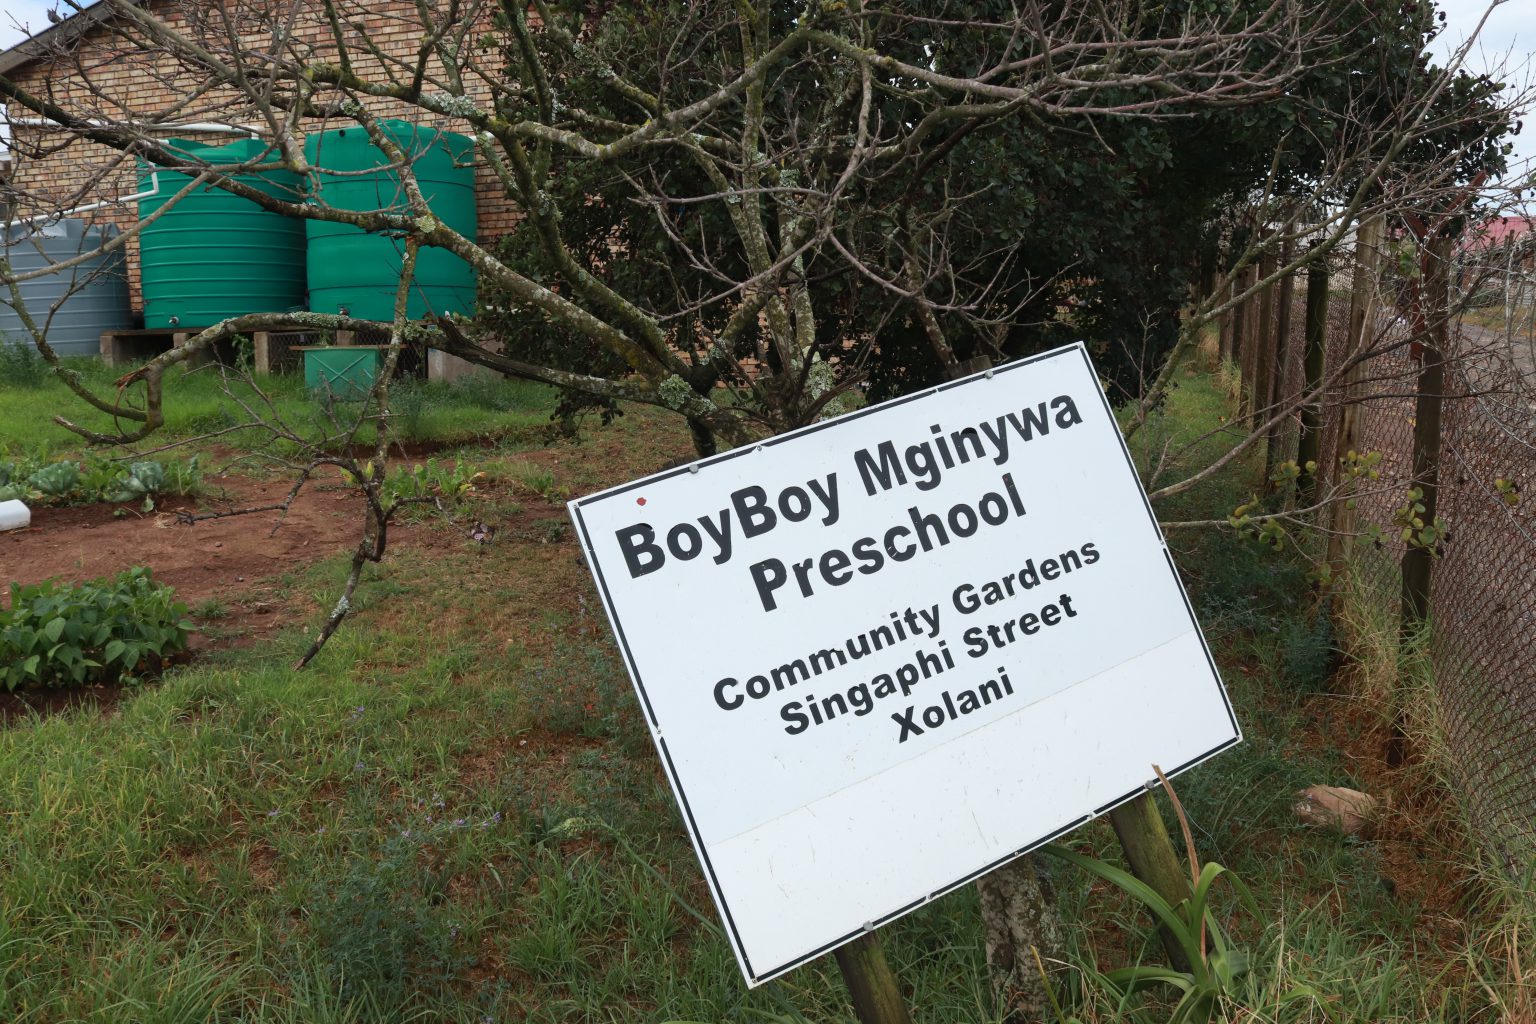 Boyboy Mginywa Preschool in Xolani Location has its electricity restored after Eskom finally took action, following a Grocott's Mail report. Photo: Khanyisa Khenese